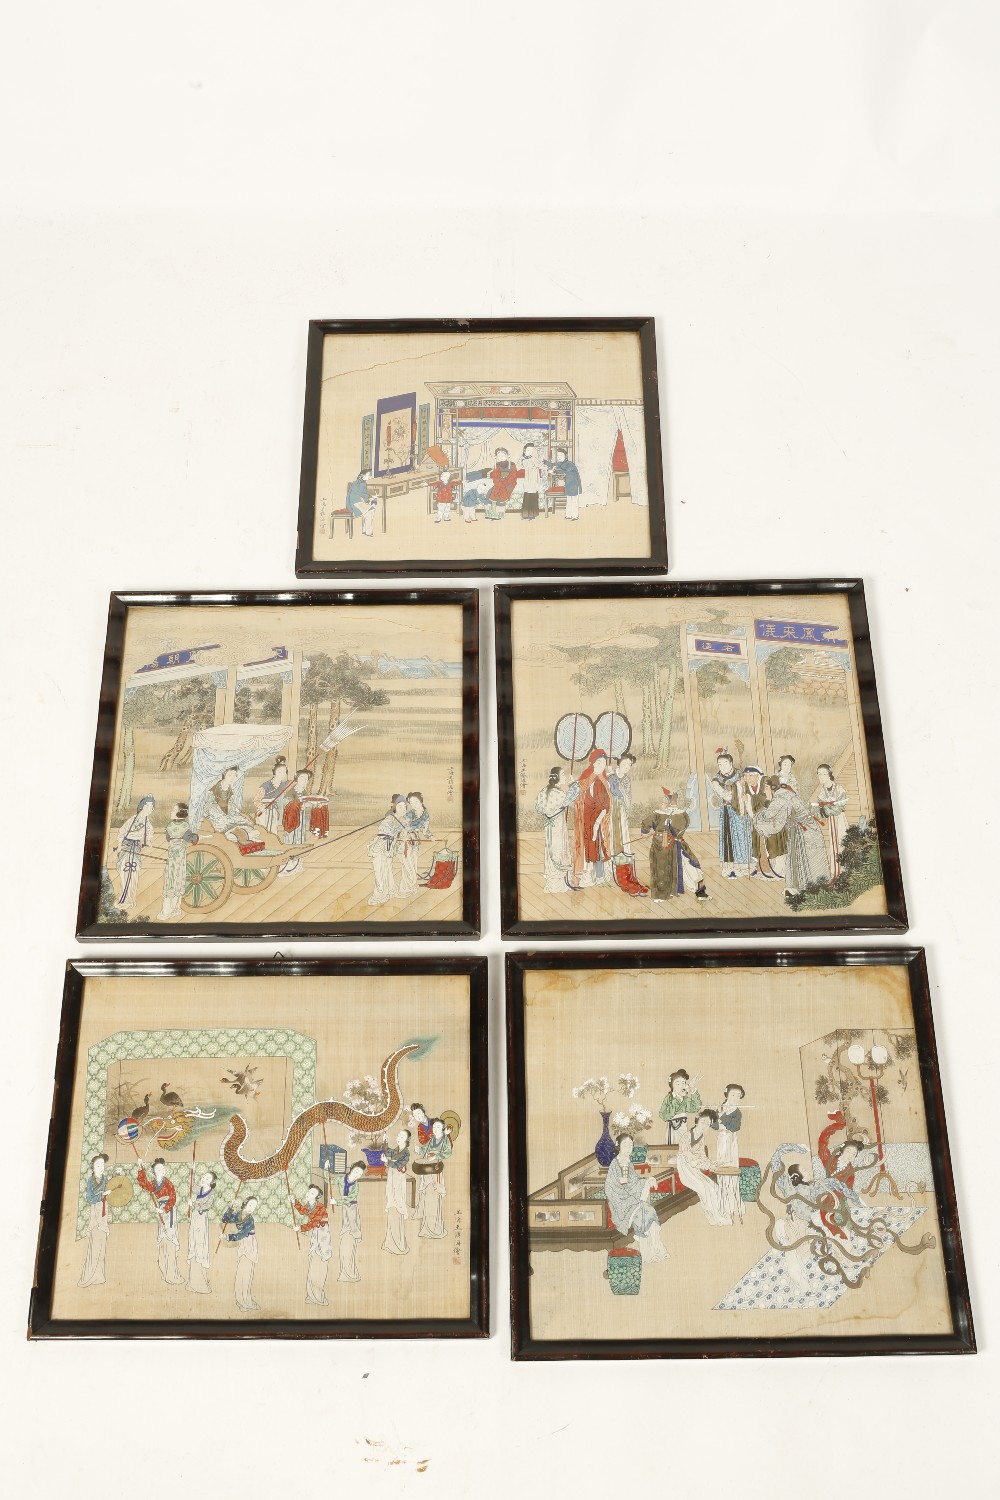 FIVE CHINESE NARRATIVE PAINTINGS showing various scenes of figures and attendants in interior and